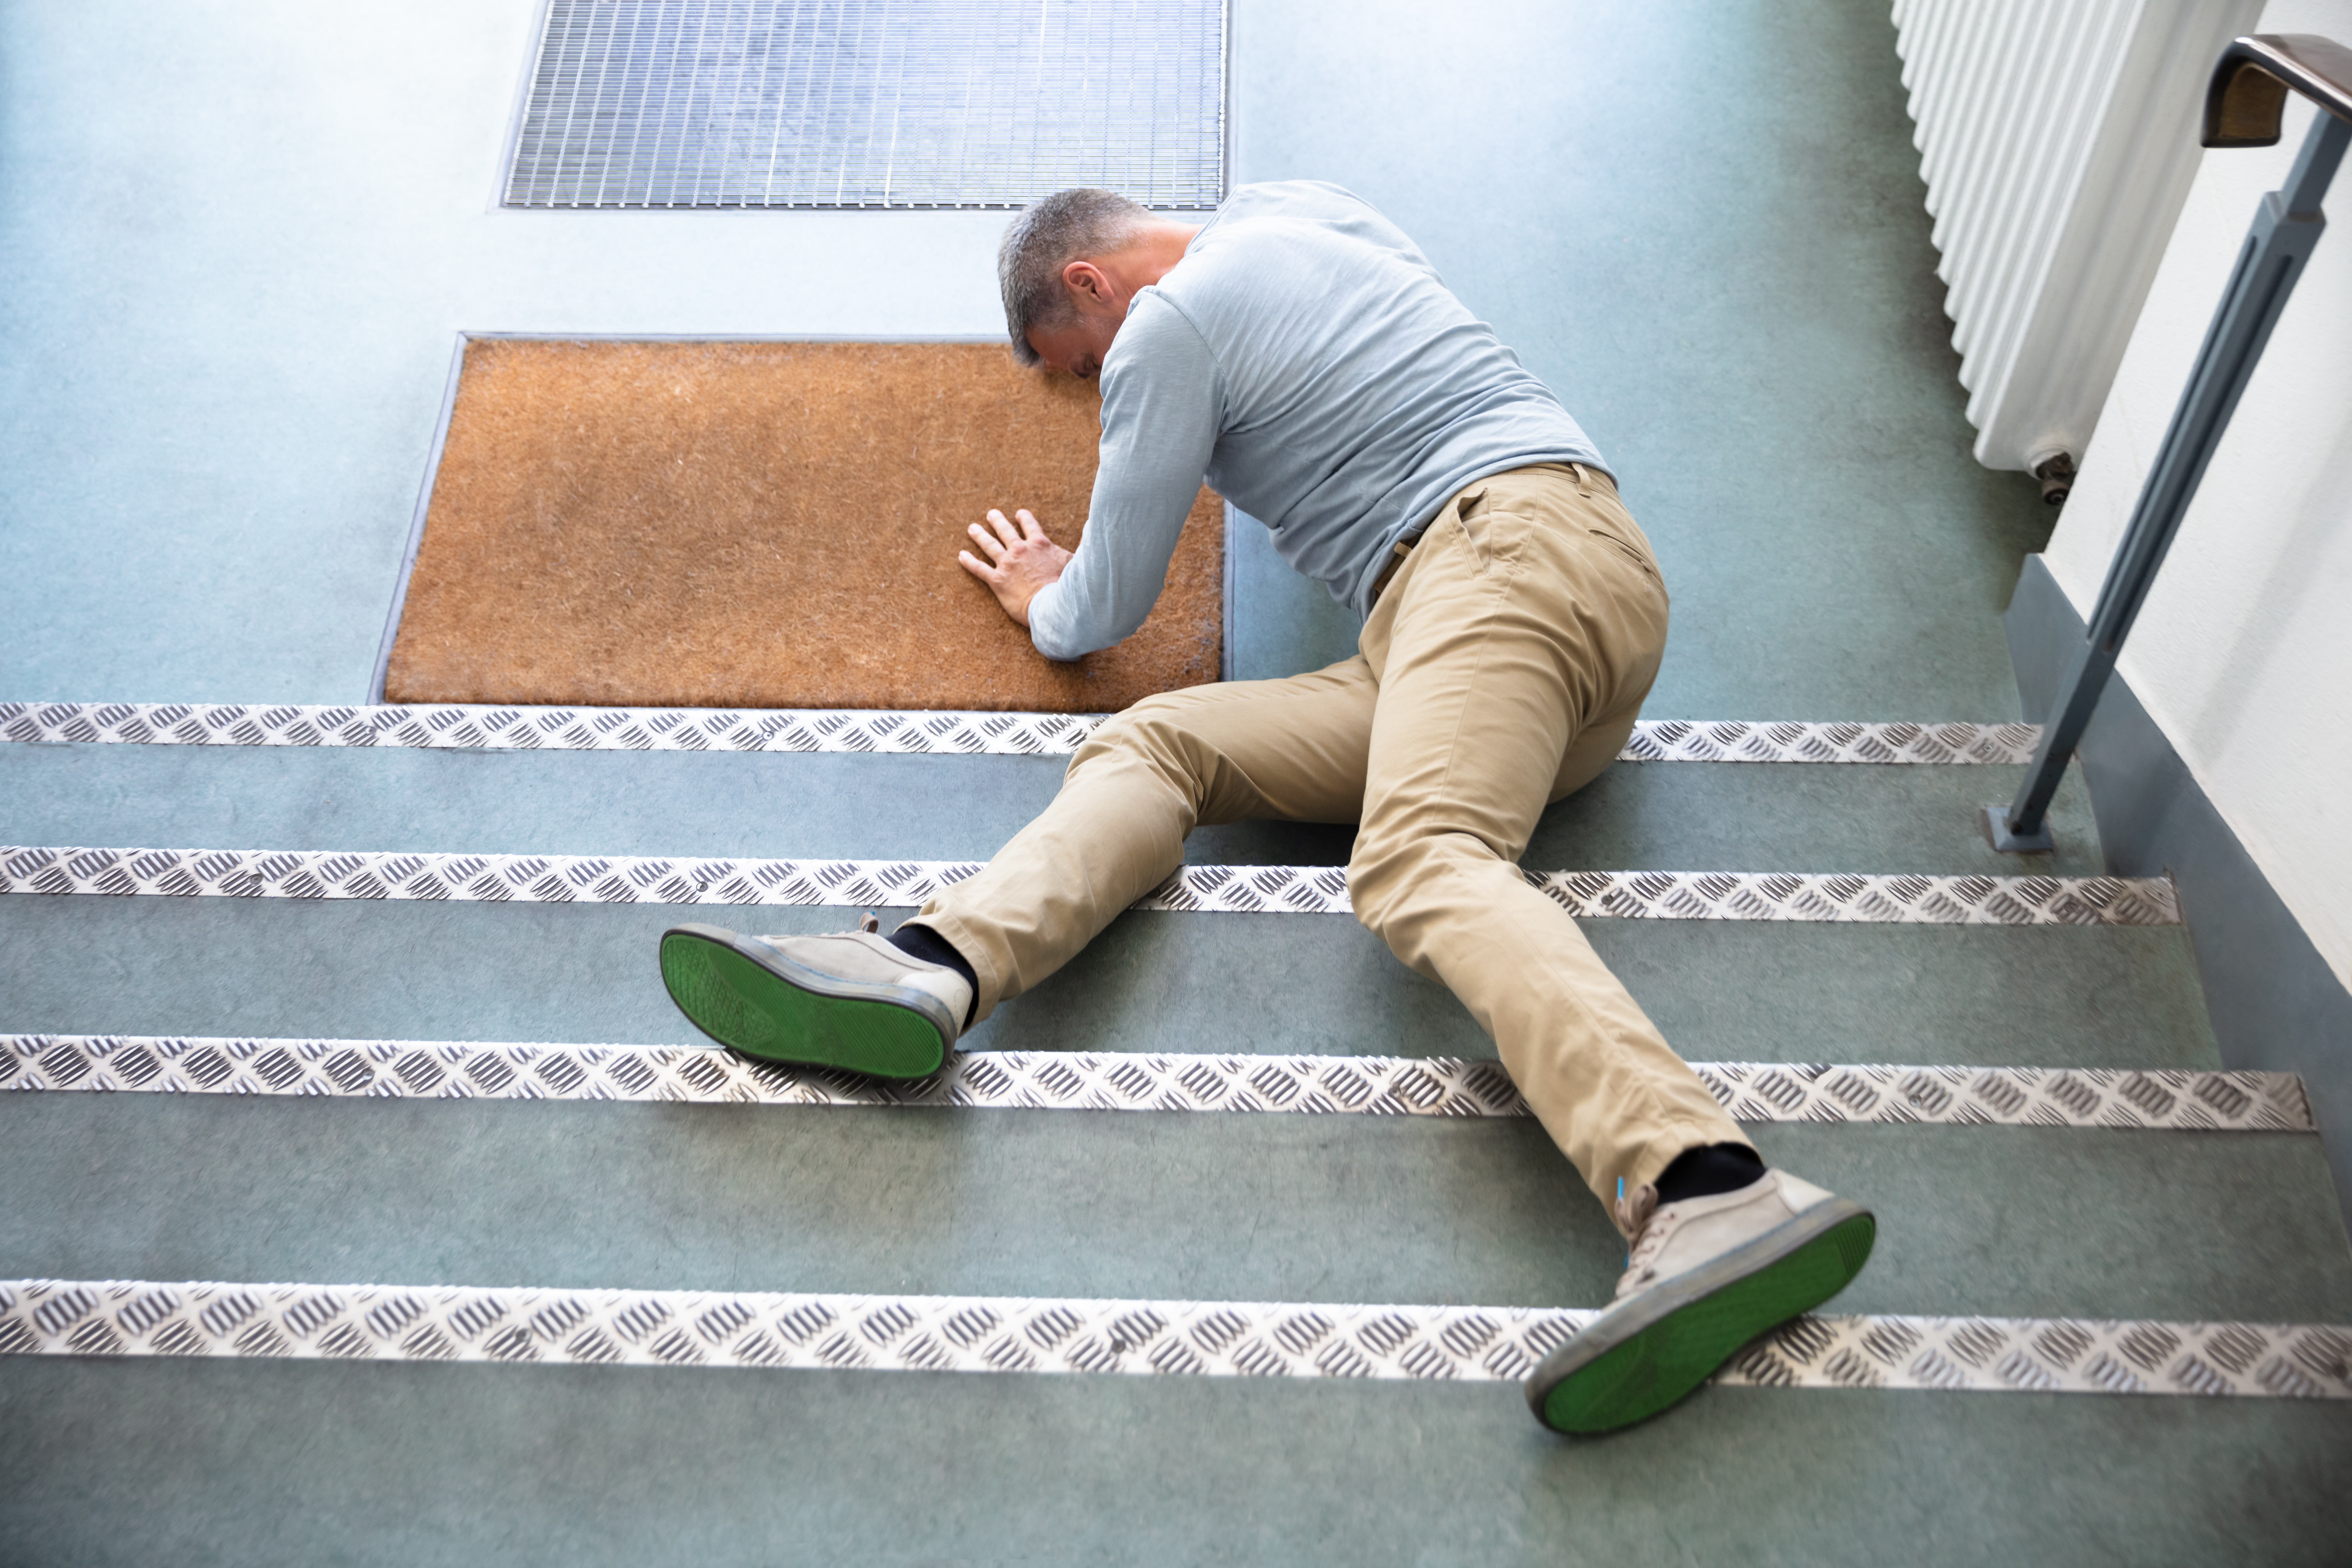 How Long After A Slip And Fall Could You Sue?